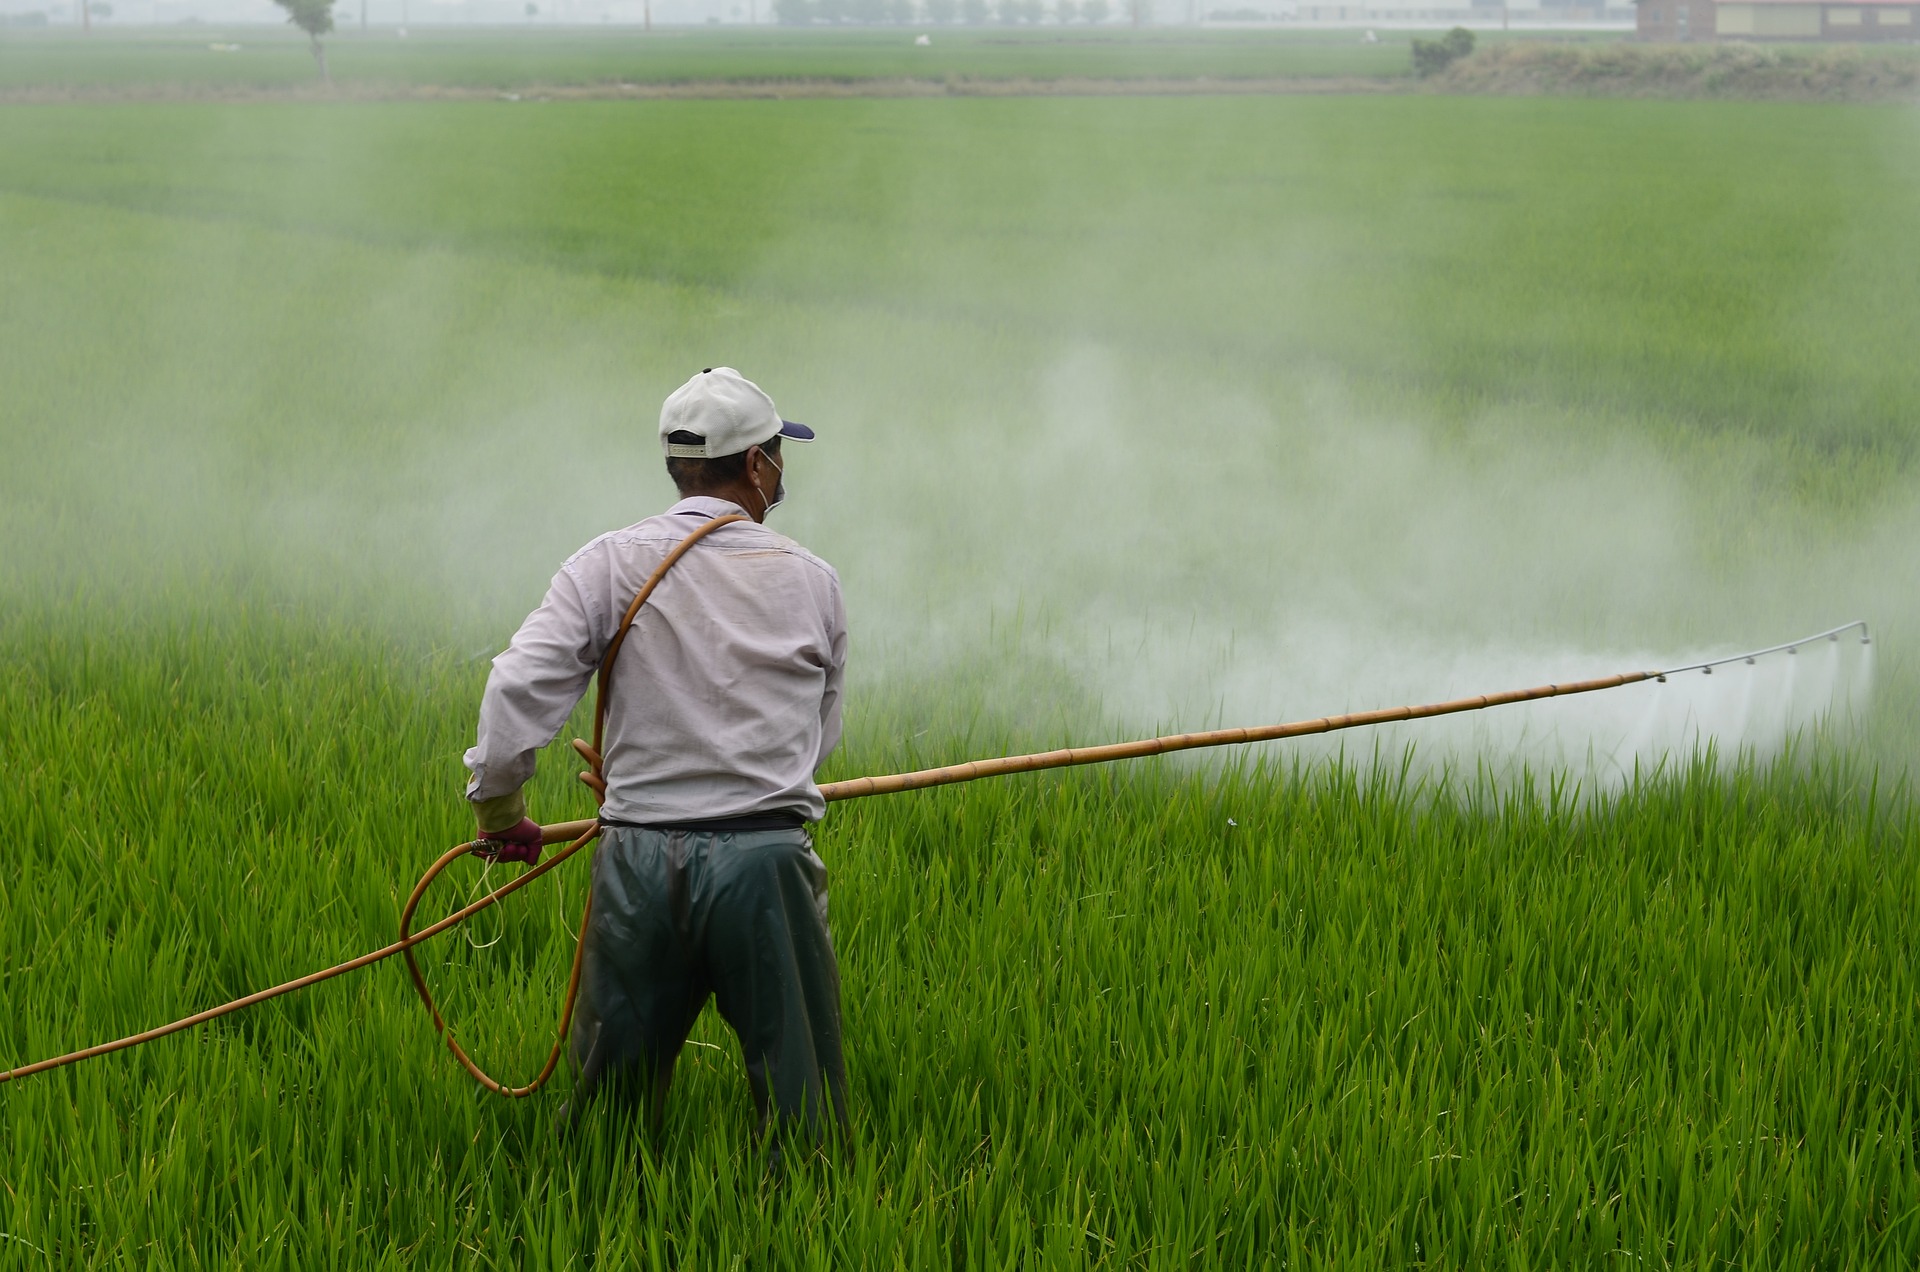 Unable to identify replacement, Mexico delays ban on herbicide glyphosate